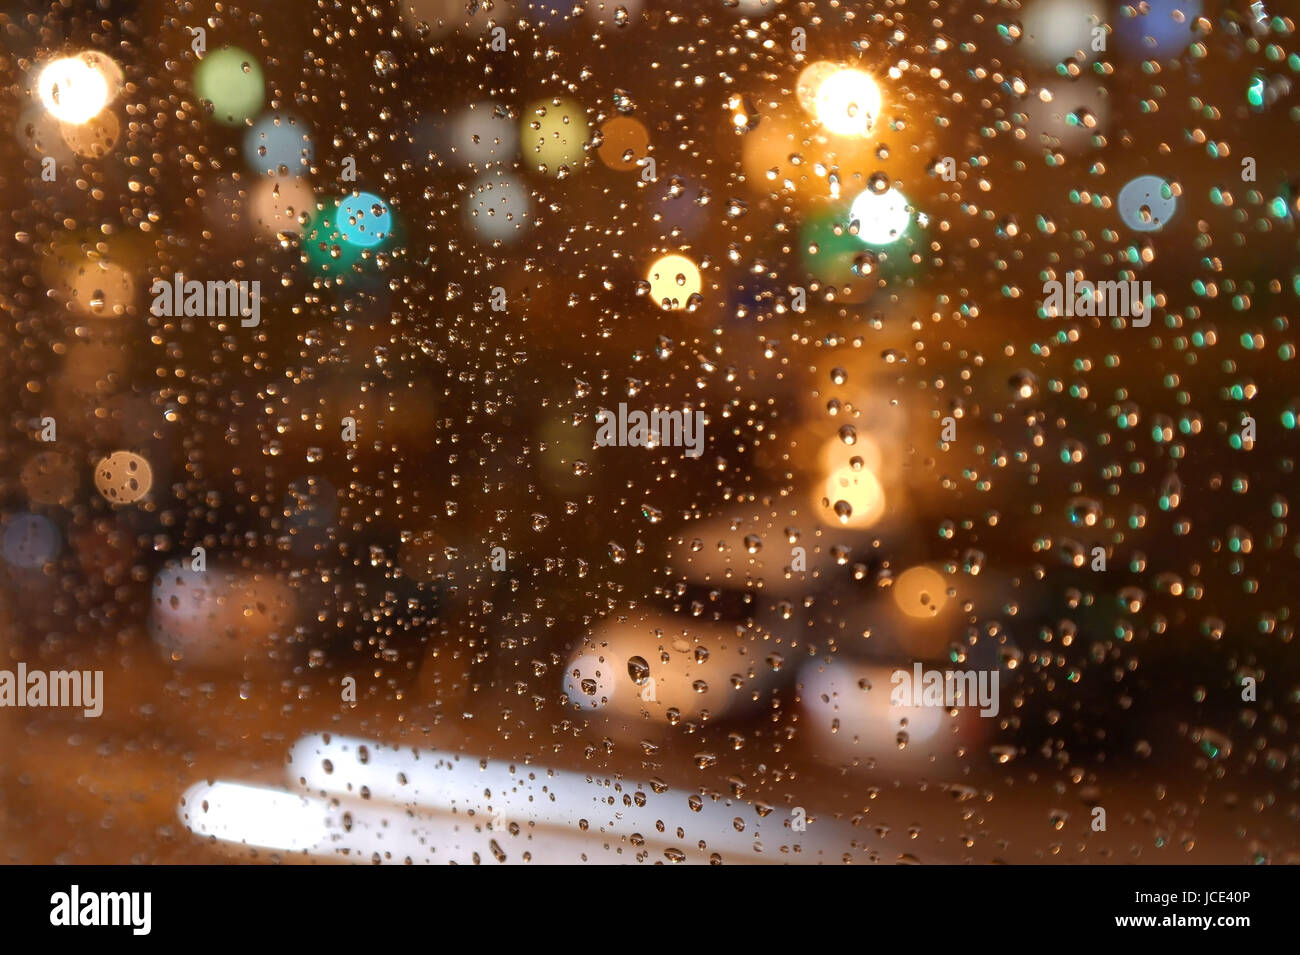 Droplets of night rain on window, on back plan washed away lights of the torches. Shallow DOF Stock Photo